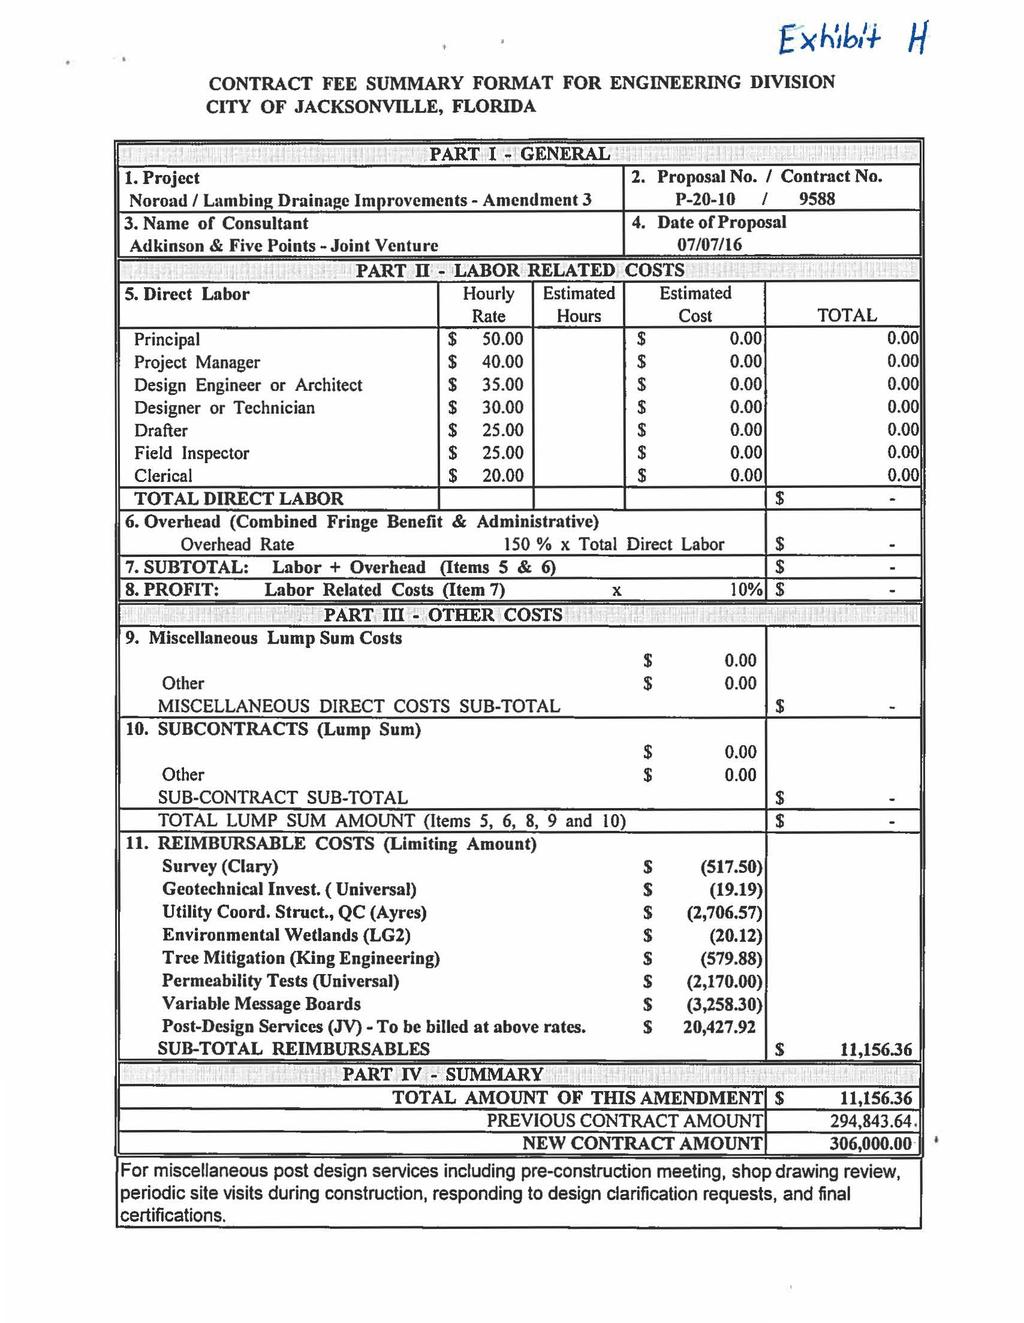 CONTRACT FEE SUMMARY FORMAT FOR ENGINEERING DIVISION CITY OF JACKSONVILLE, FLORIDA PART I - GENERAL 1. Project 2. Proposal No. I Contract No.